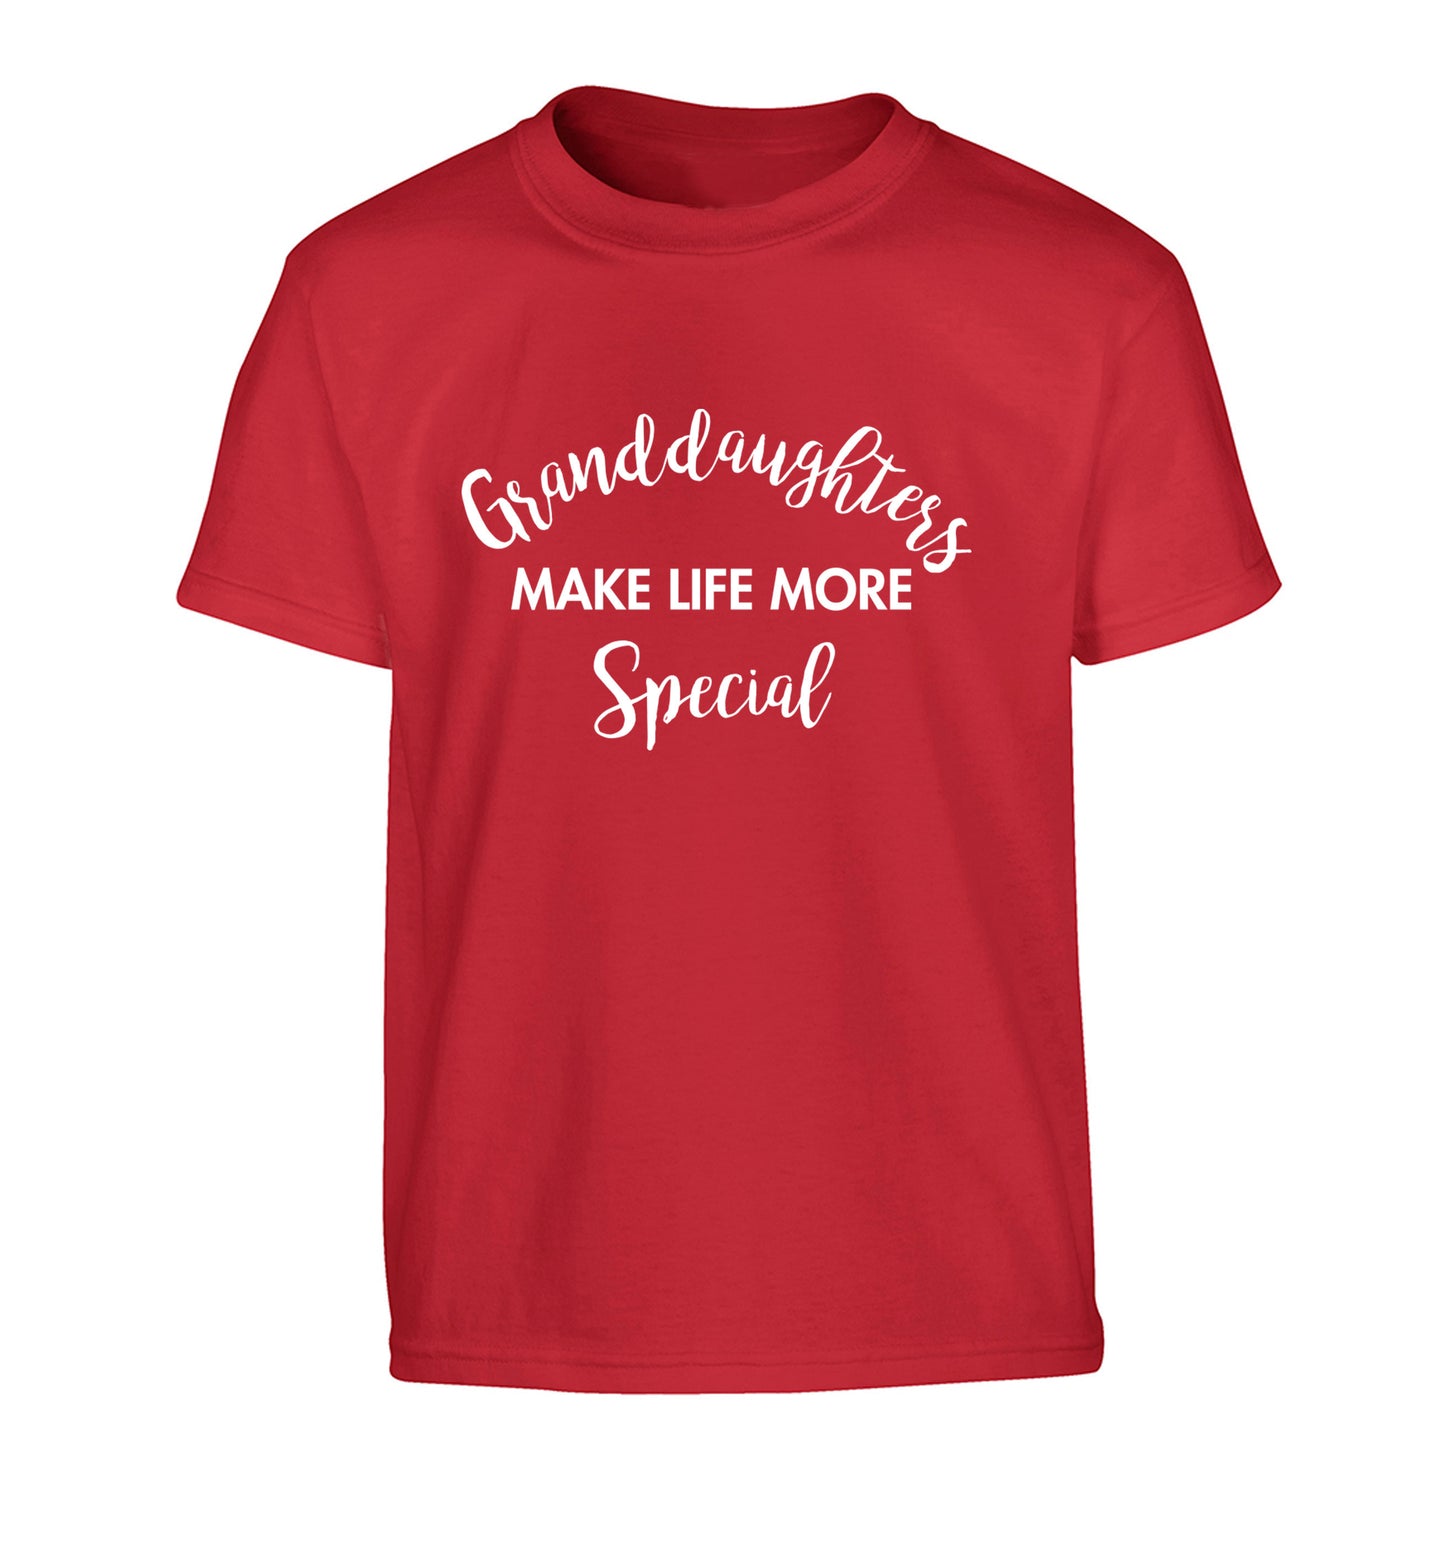 Granddaughters make life more special Children's red Tshirt 12-14 Years